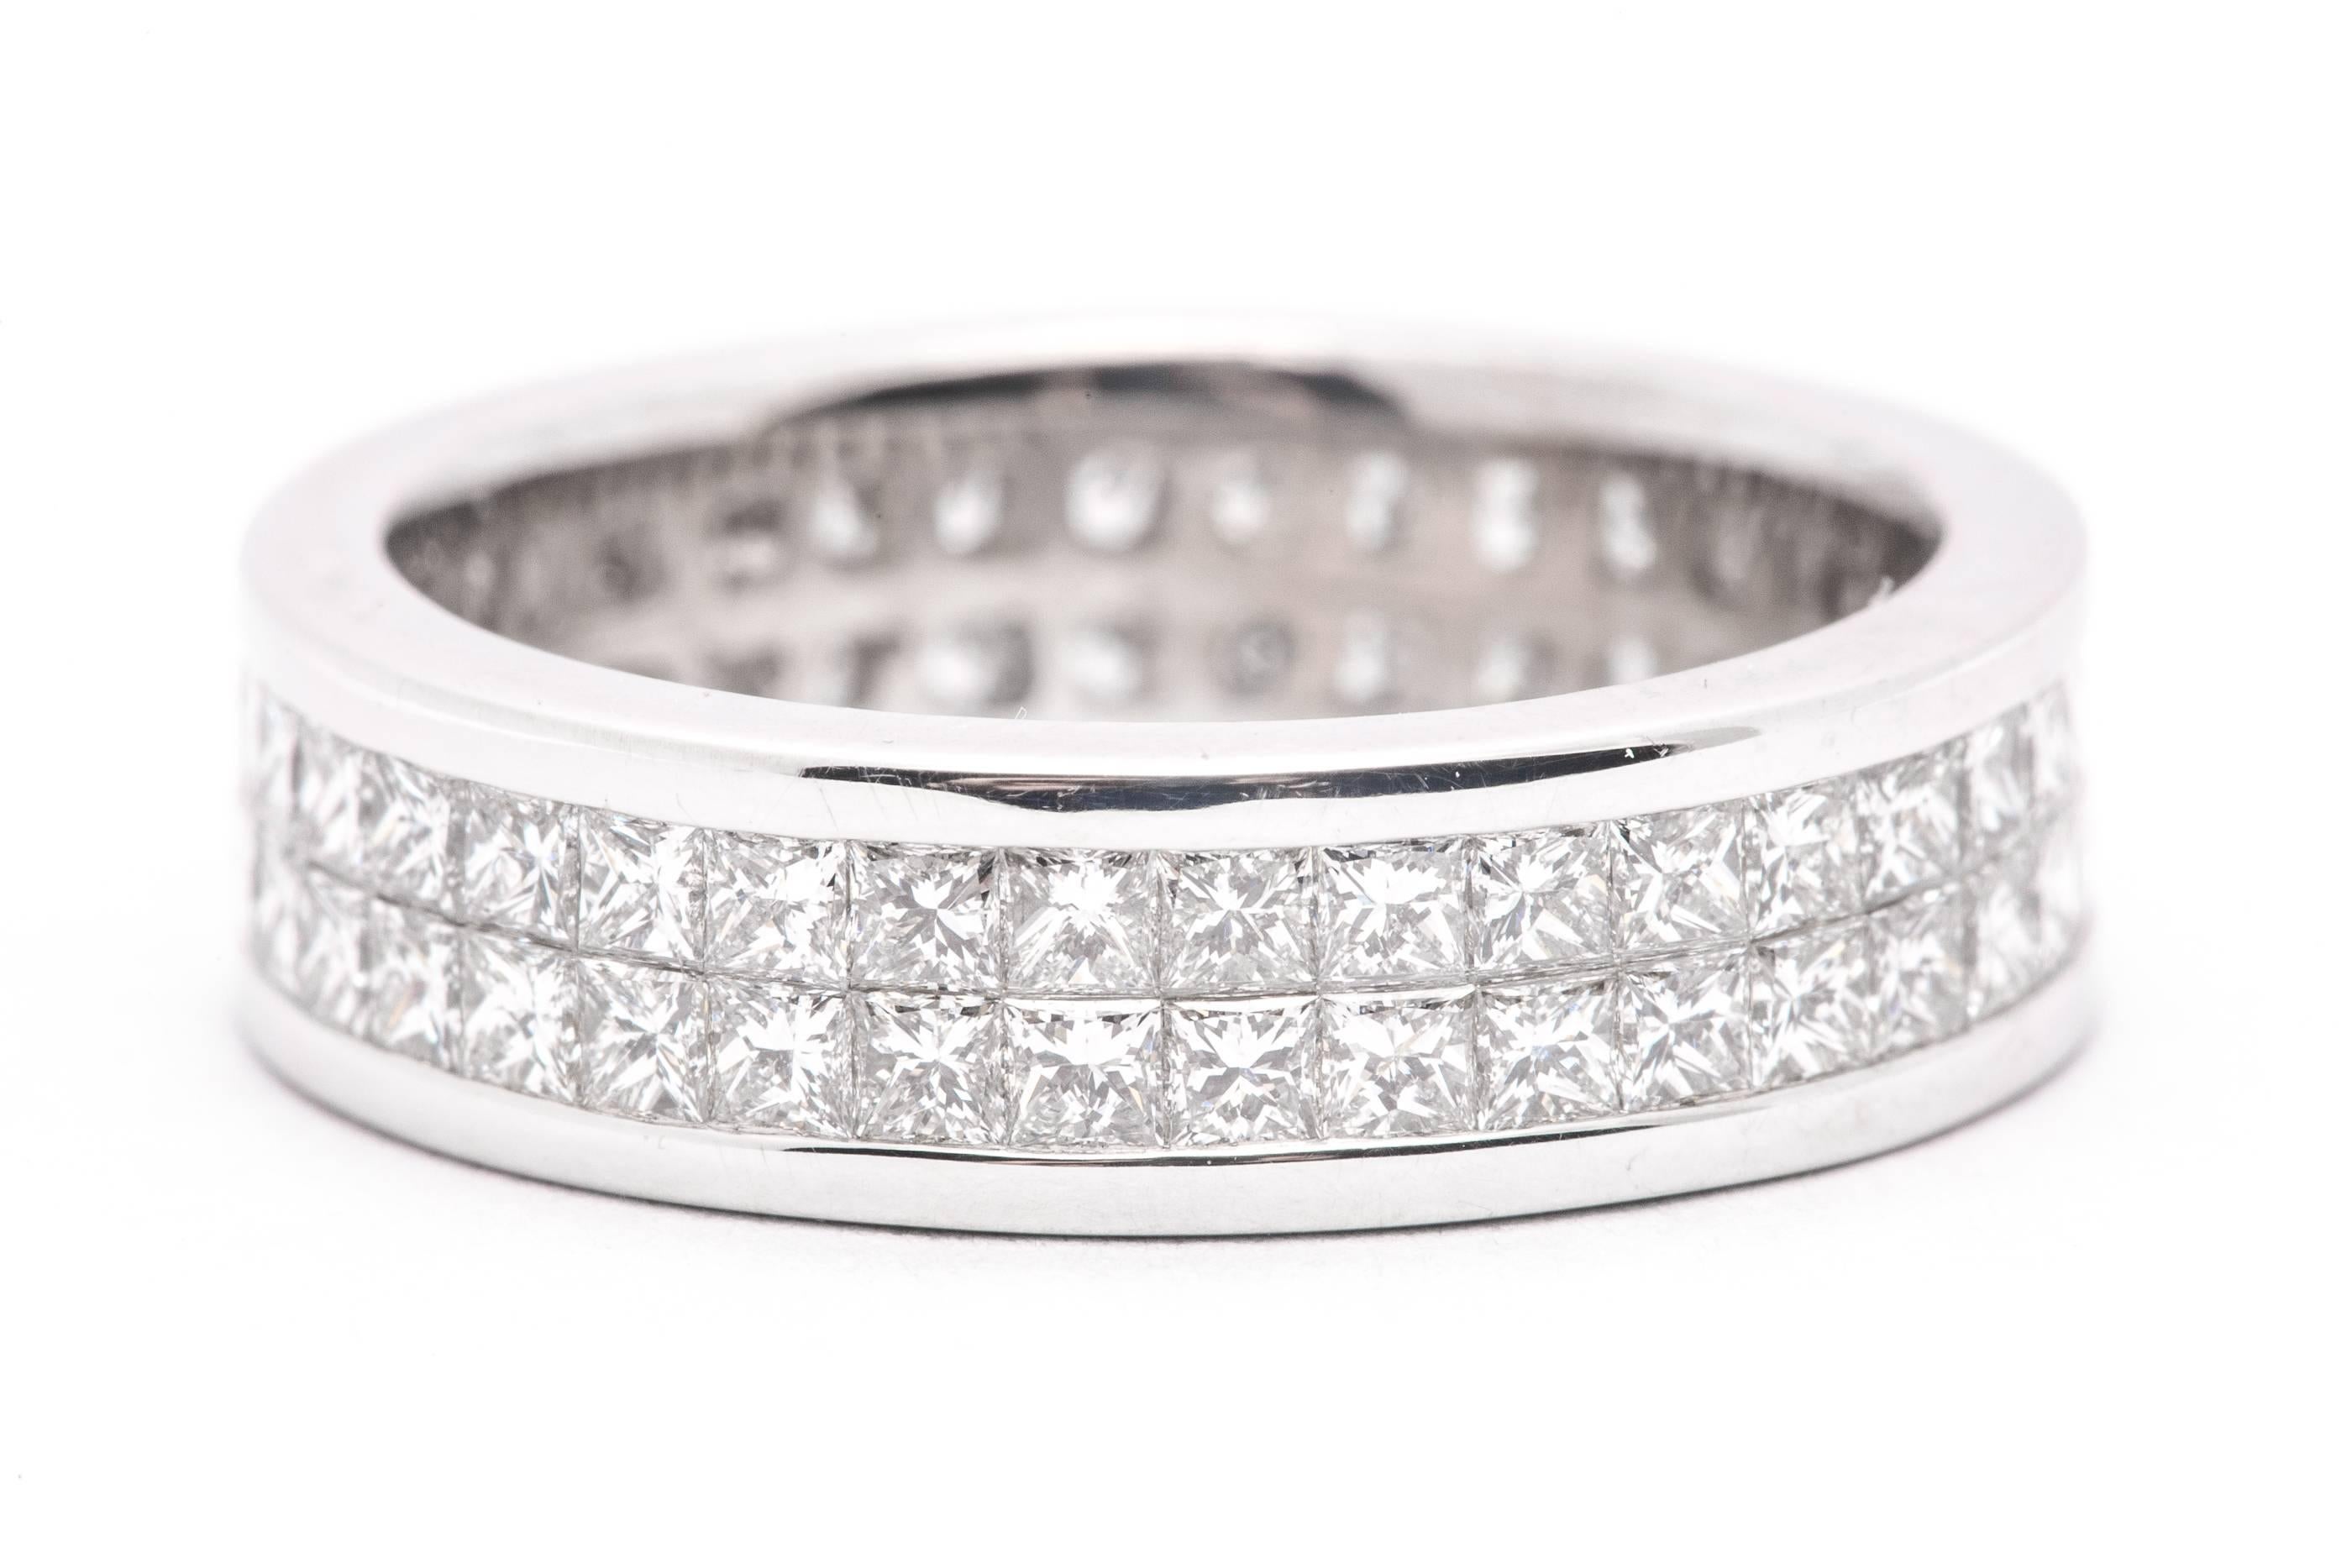 A platinum, and princess cut diamond eternity band.  Set with a double row of invisible set diamonds this band features a total of seventy two diamonds weighing a combined 3.60 carats.

Grading as VS clarity and G color, the superbly matched